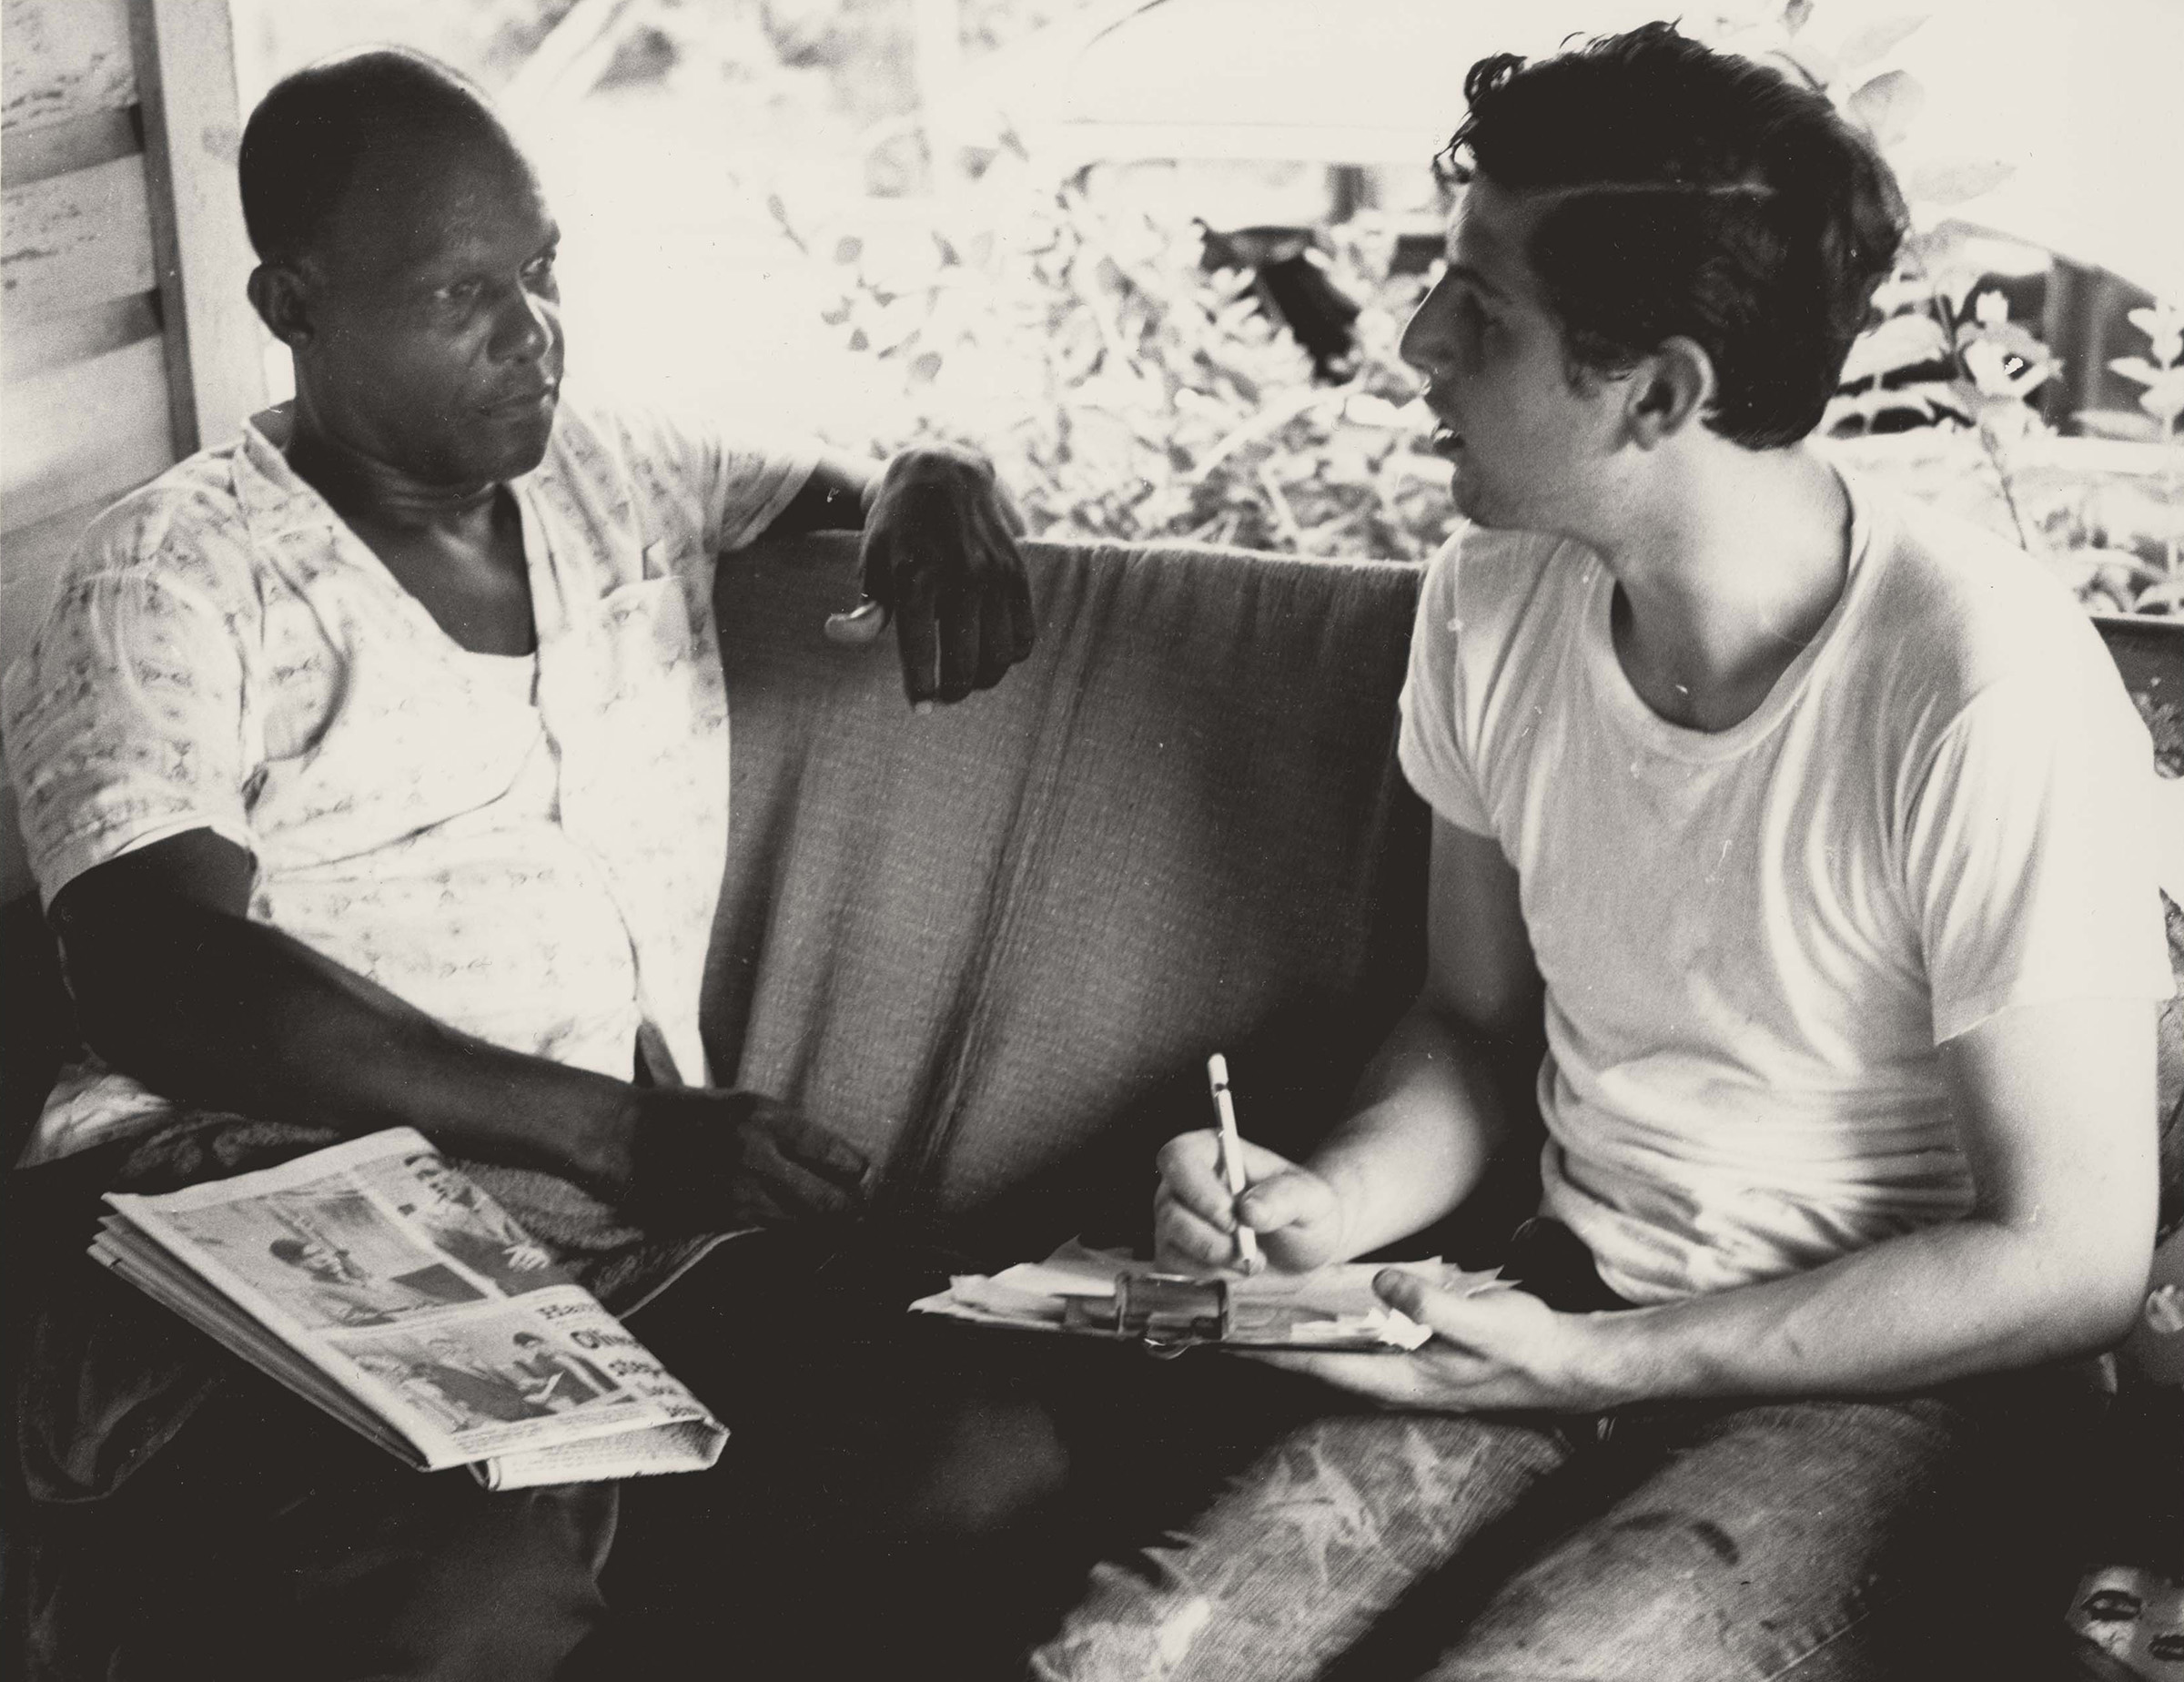 Voter Registration Canvassing, July 1964. Photograph by Herbert Randall. Horace Laurence (left) and Freedom Summer volunteer Dick Landerman (right) discuss voting rights while sitting on Laurence's front porch on Fairley Street in Hattiesburg, Mississippi, during Freedom Summer. M351 Herbert Randall Freedom Summer Photographs, Historical Manuscripts, The University of Southern Mississippi.